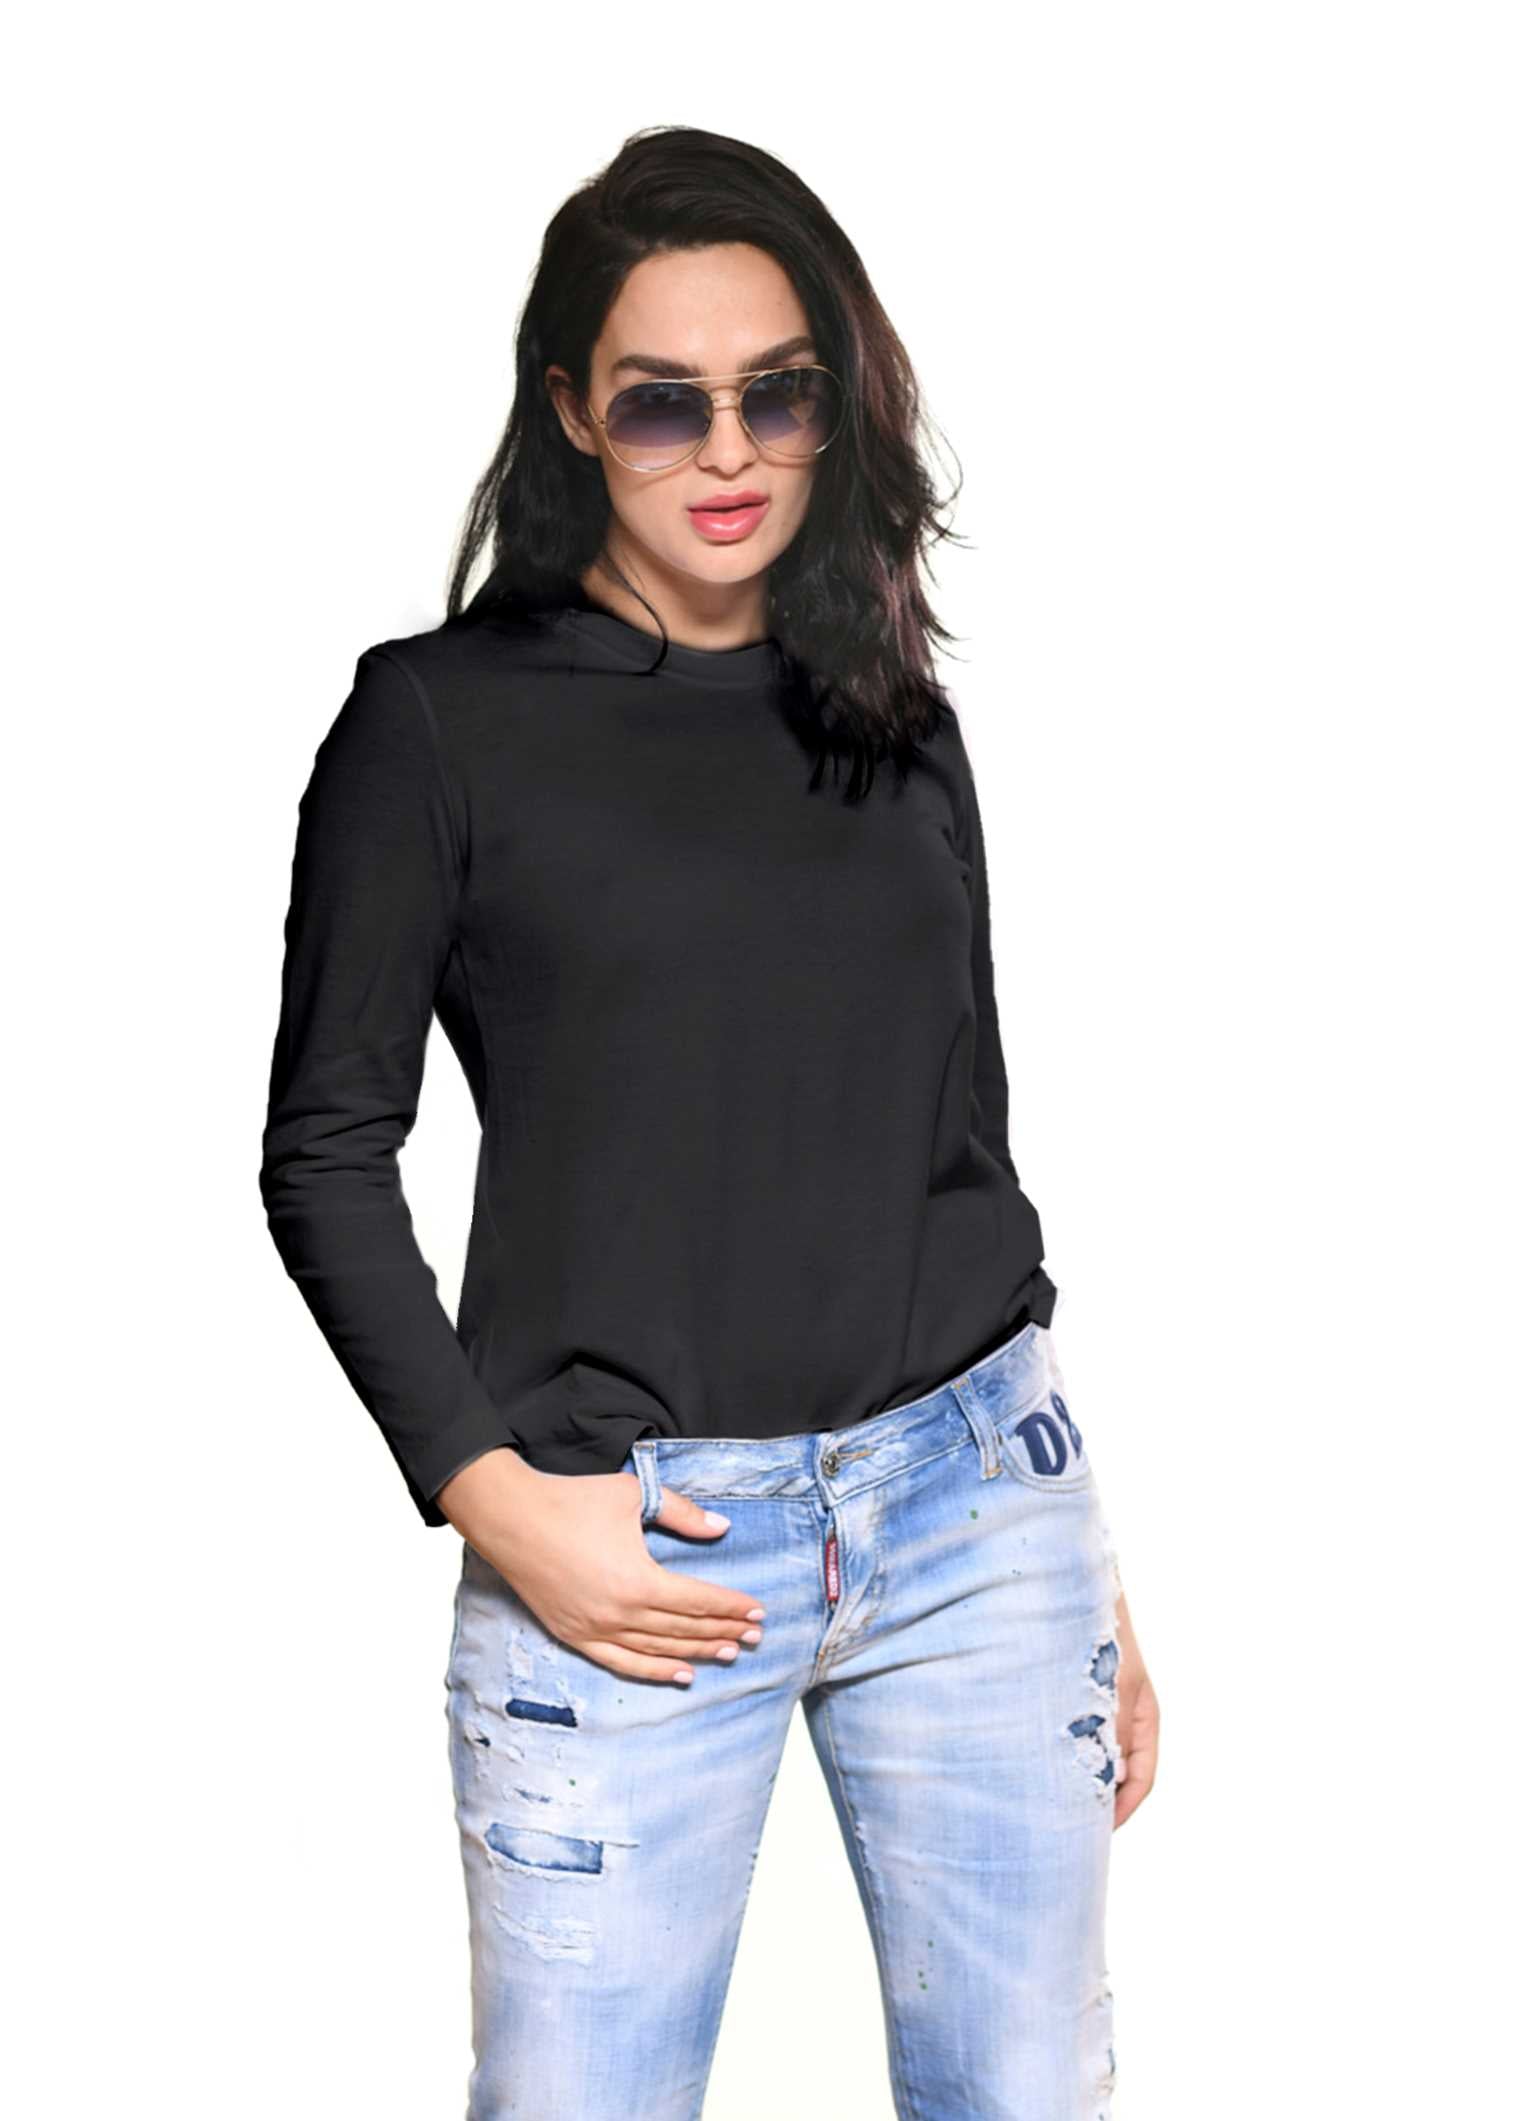 Women wearing sustainable cotton long sleeve tees in color black